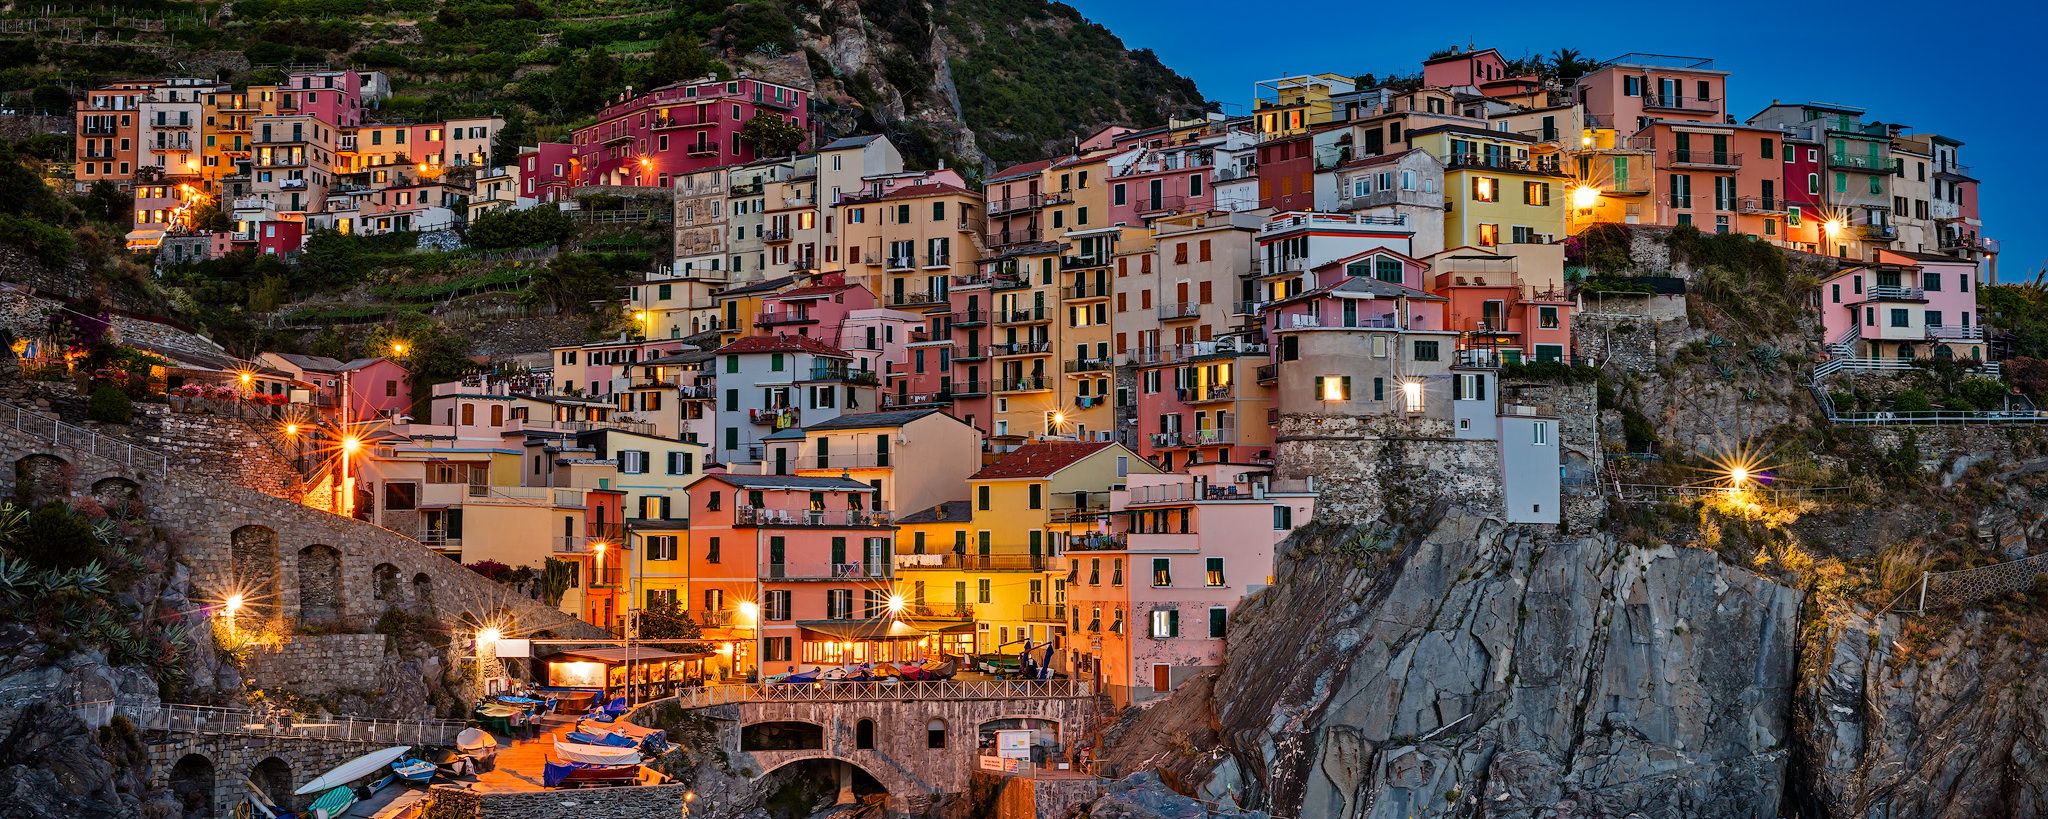 Italy is colorful